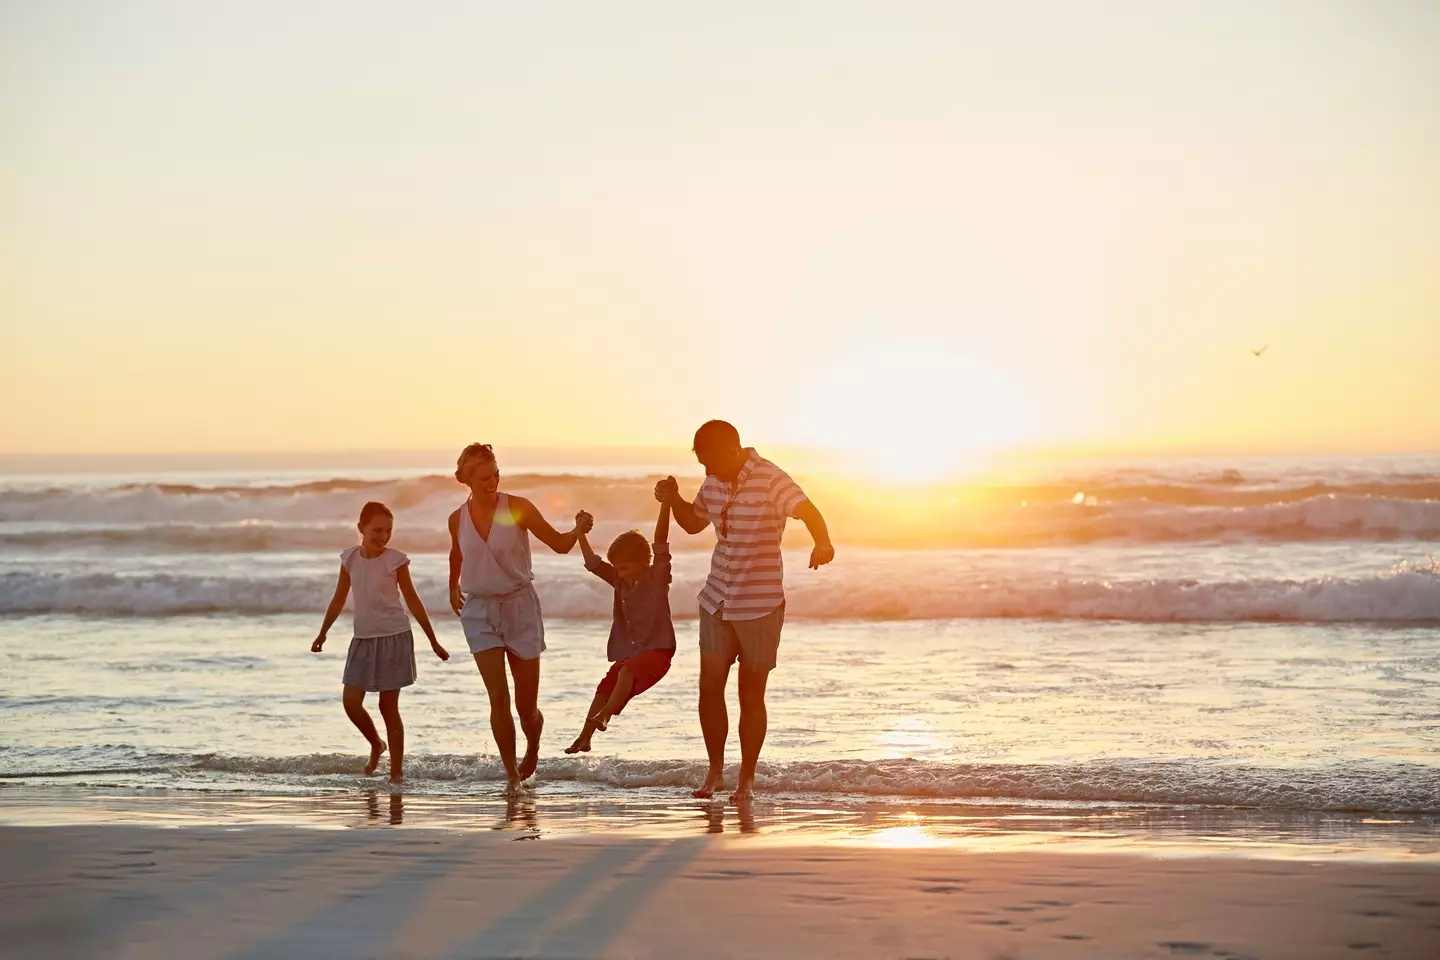 Many families are eager to get the best deal when booking their summer holiday. (Morsa Images / Getty Images)